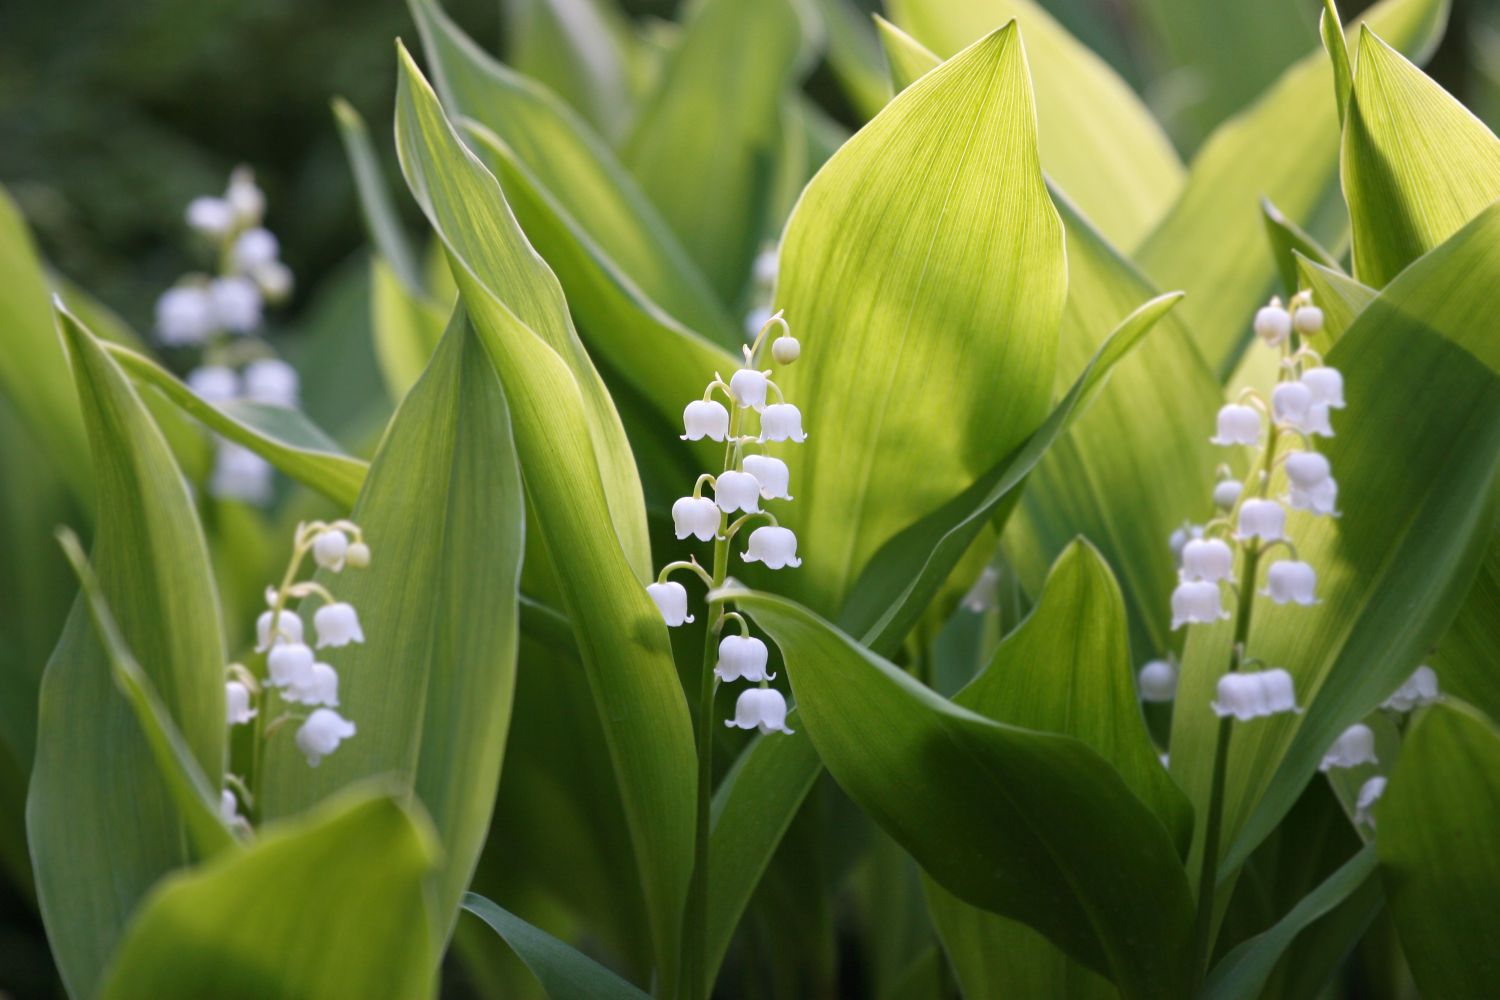 Lily of the Valley Flowers - How to Grow Convallaria majalis in Pots